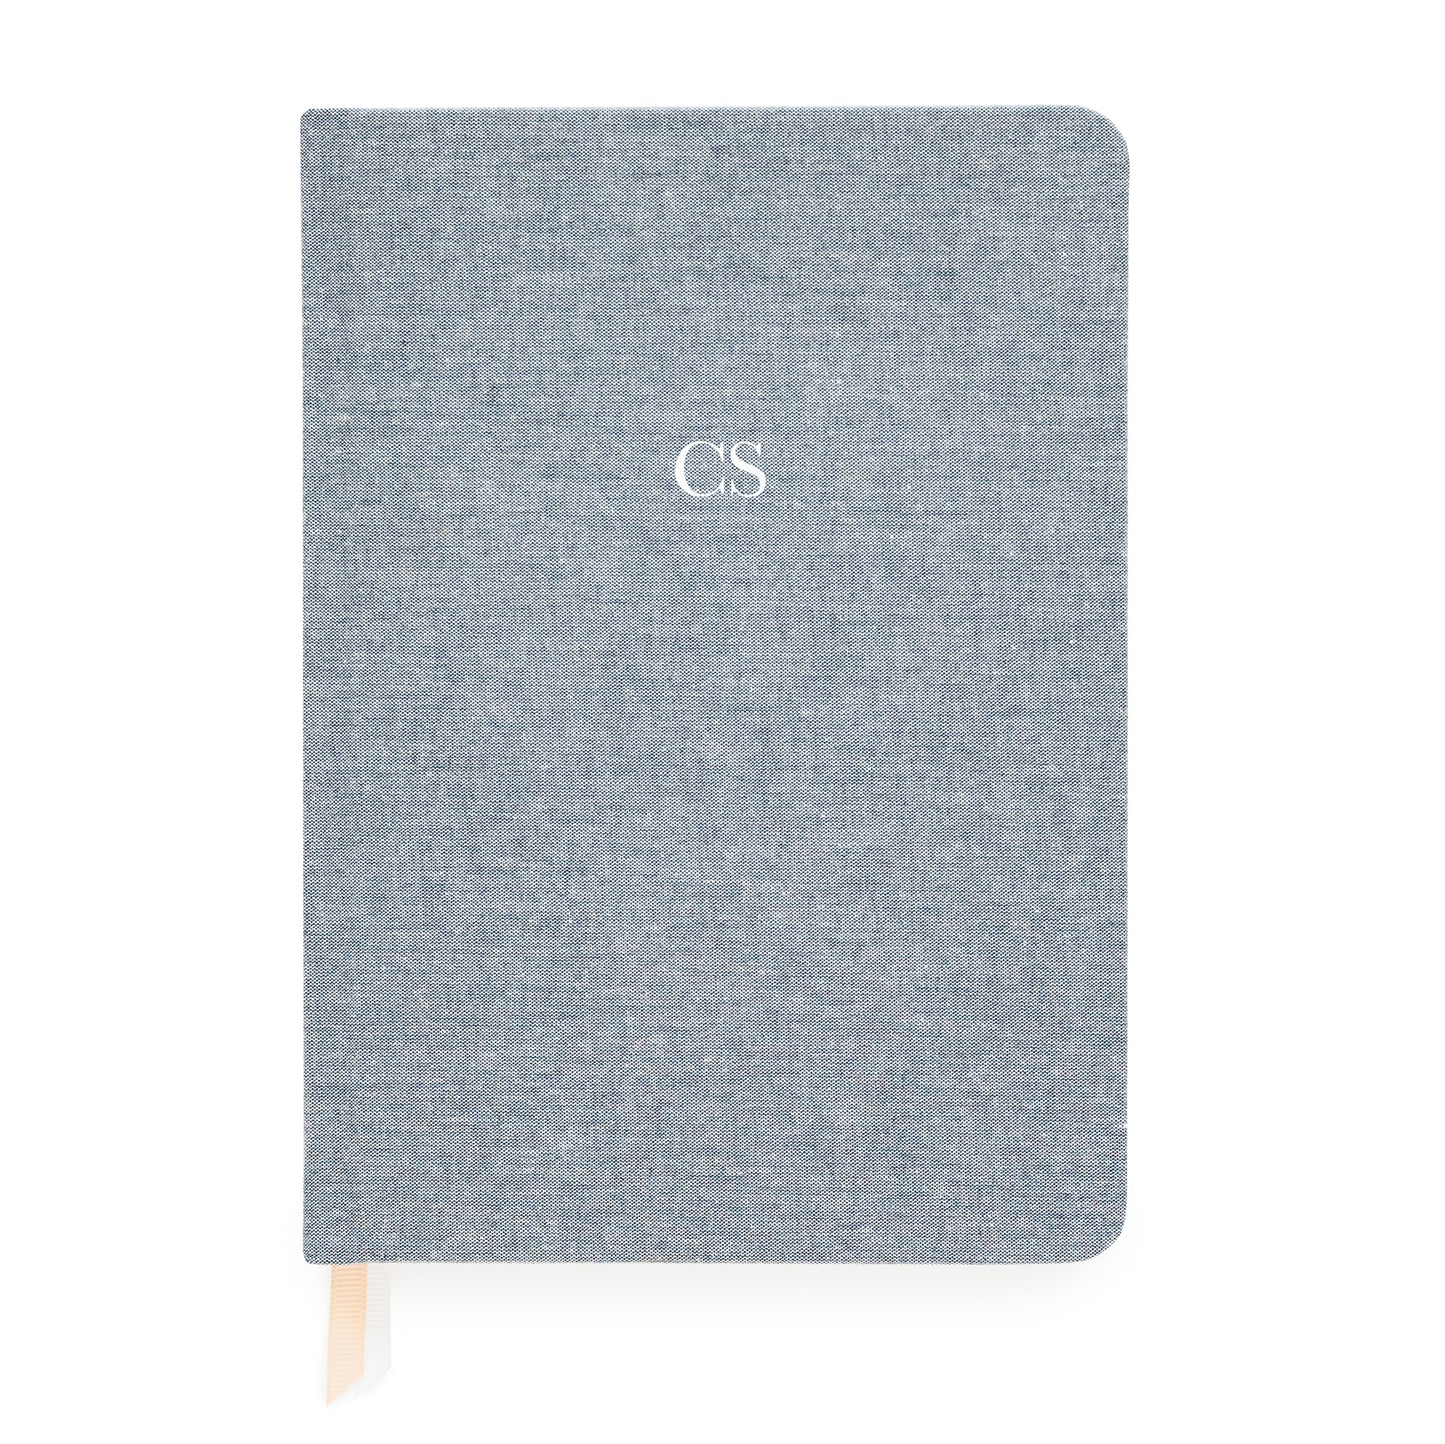 tailored chambray journal with white foil monogram